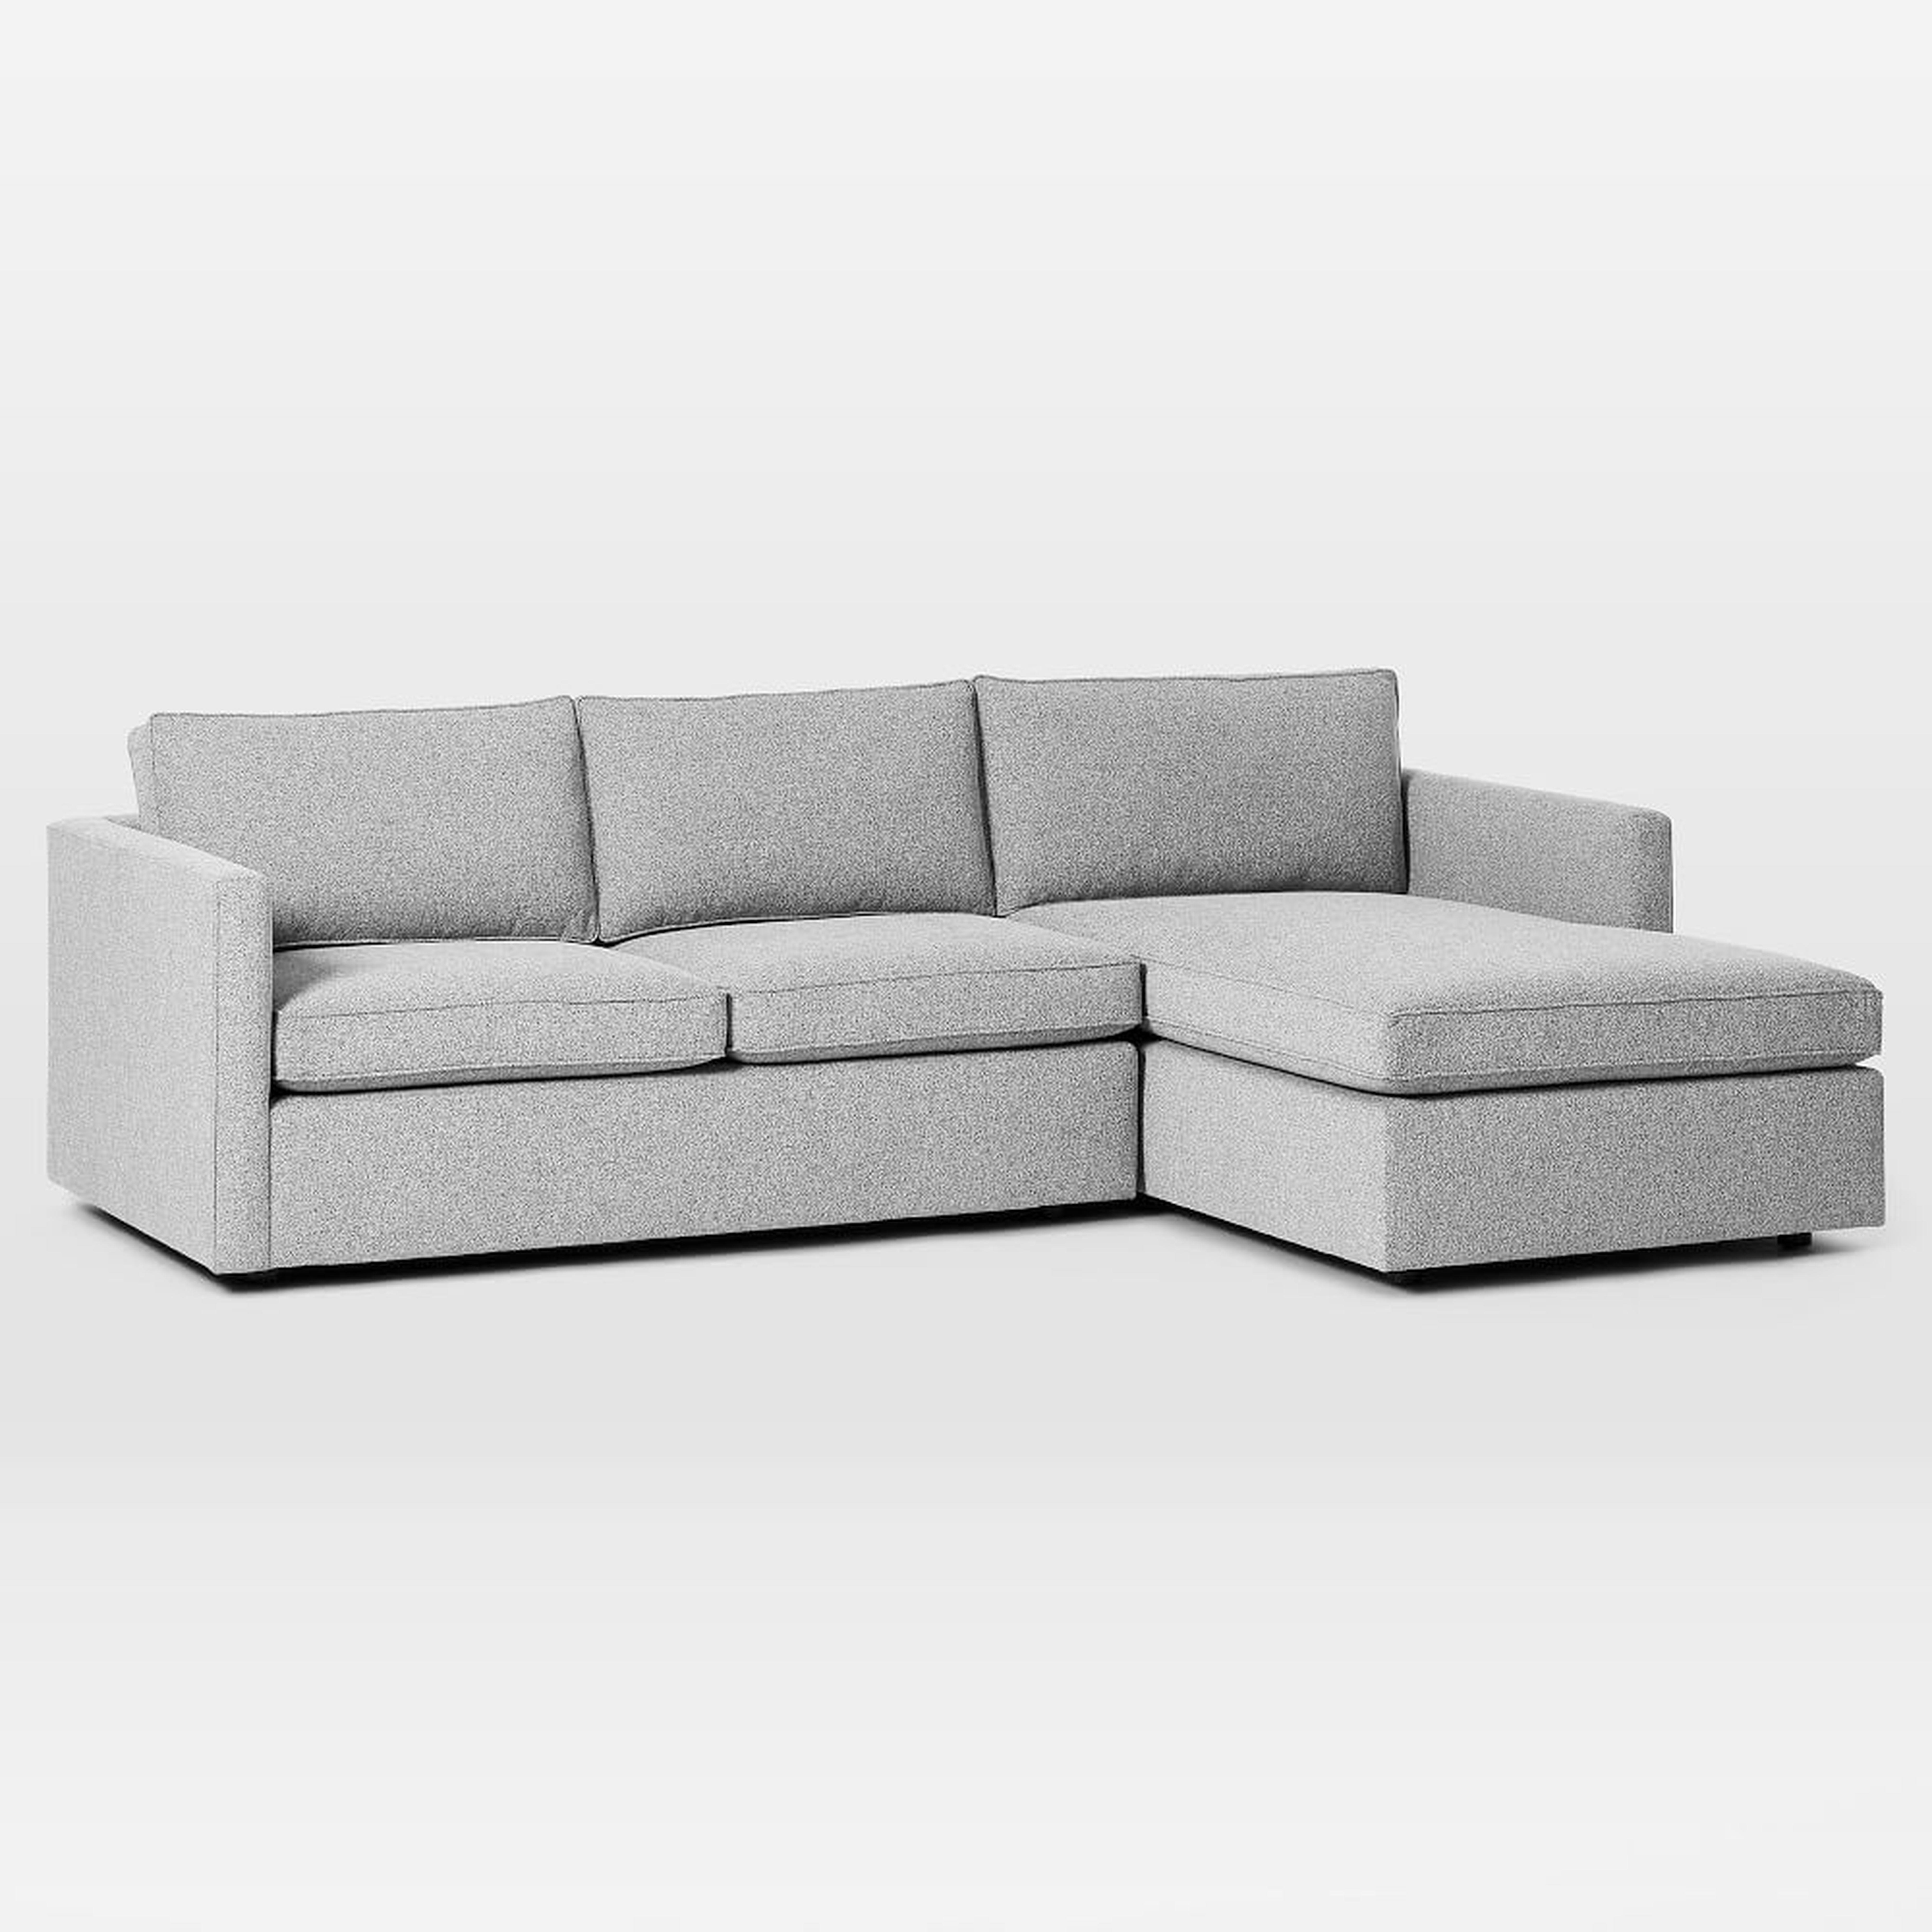 Harris 111" Right Multi Seat 2-Piece Chaise Sectional w/ Storage, Standard Depth, Chenille Tweed, Storm Gray - West Elm